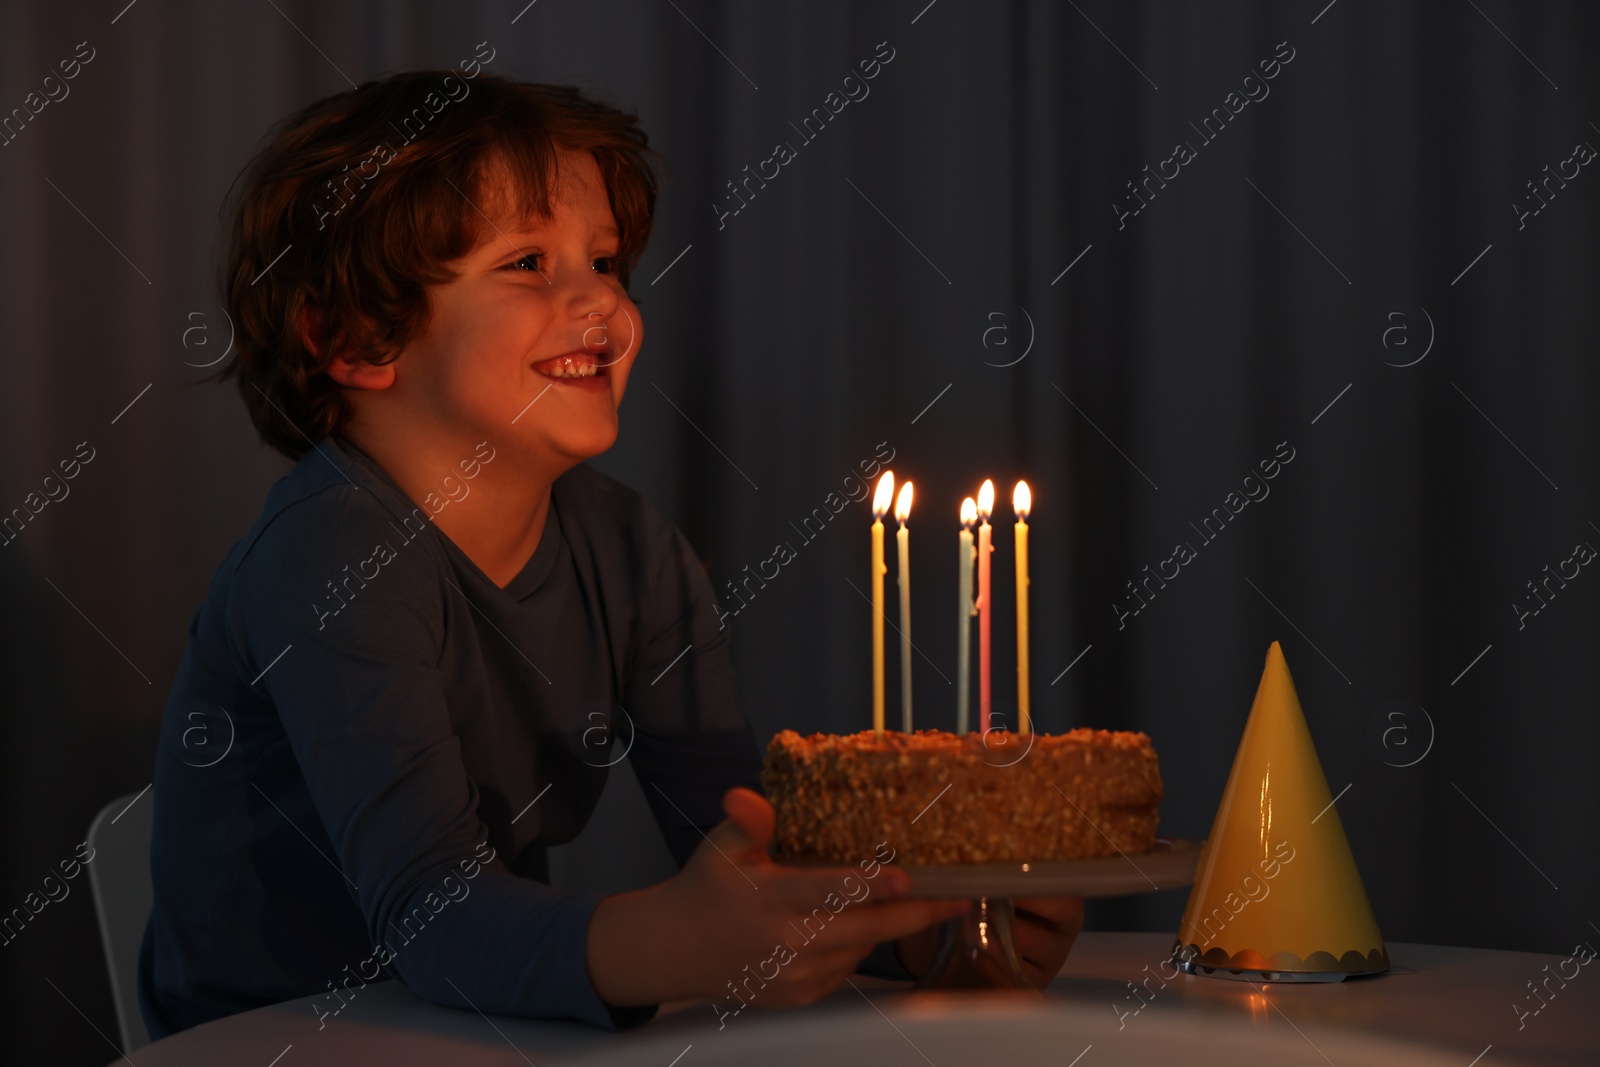 Photo of Cute boy with birthday cake at table indoors